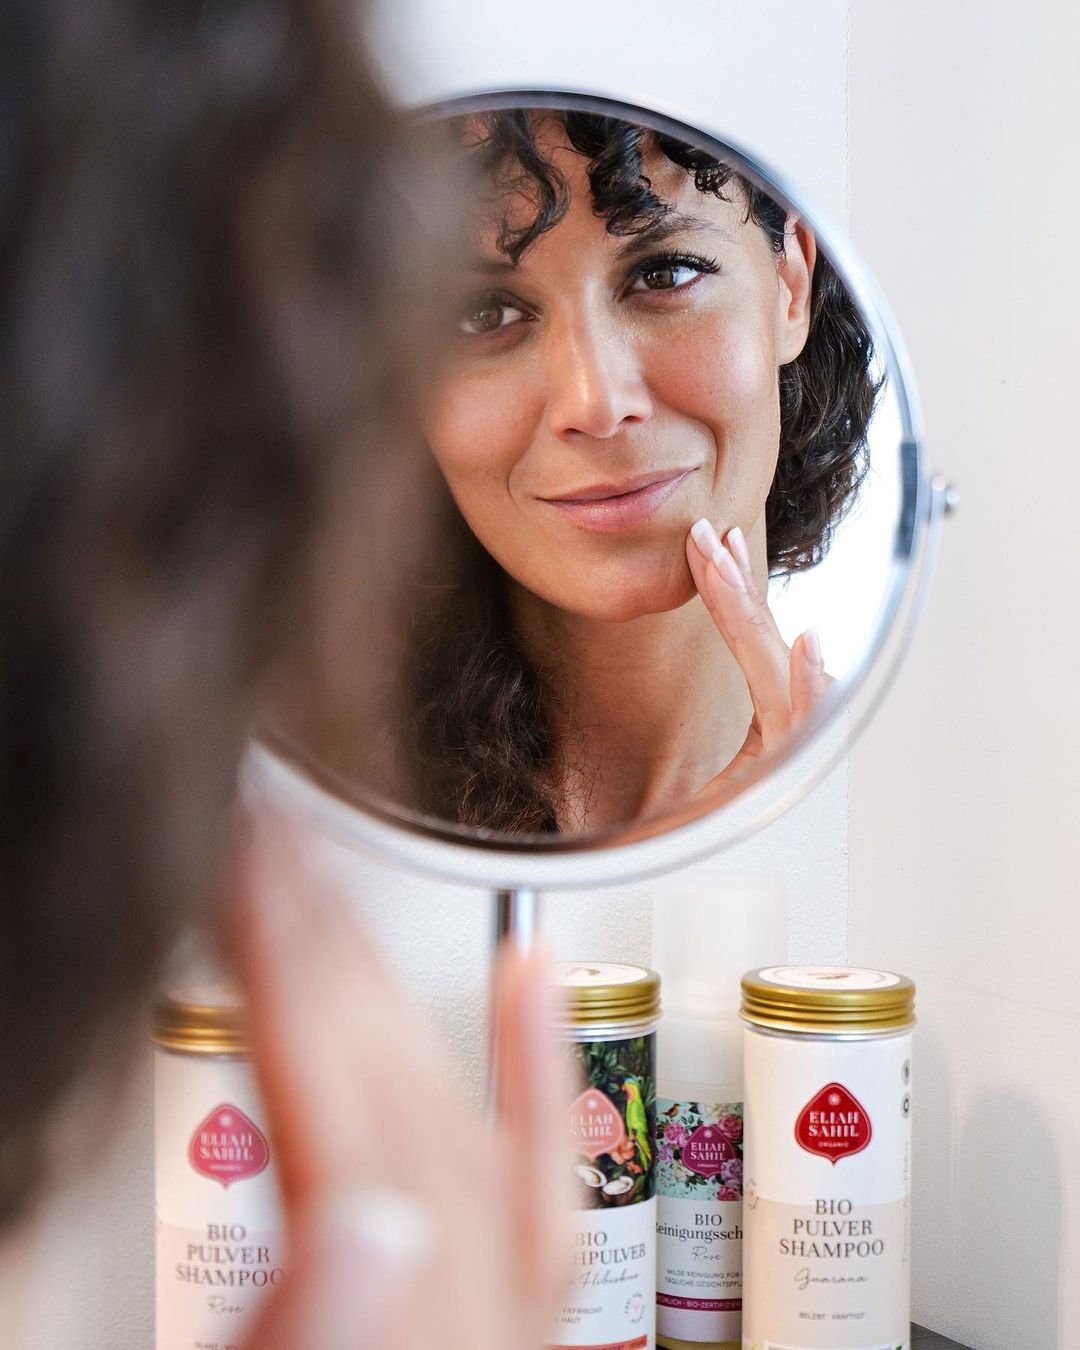 model in the mirror eliah sahil organic products